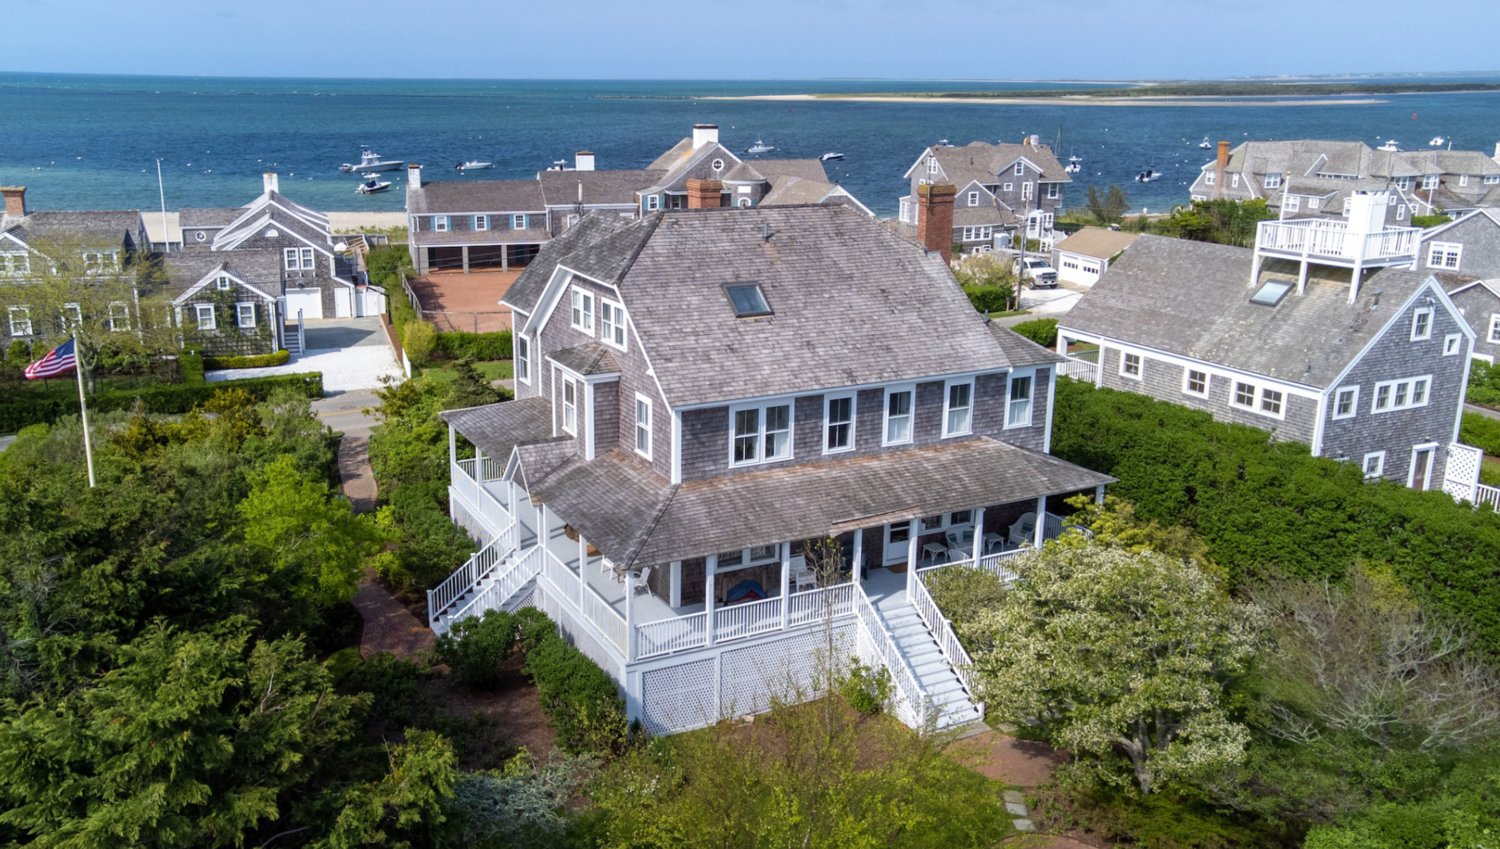 Located on prestigious Hulbert Avenue, just a short distance from the center of historic downtown Nantucket, this eight-bedroom, three-and-a-half bathroom home sits on just over a third of an acre.